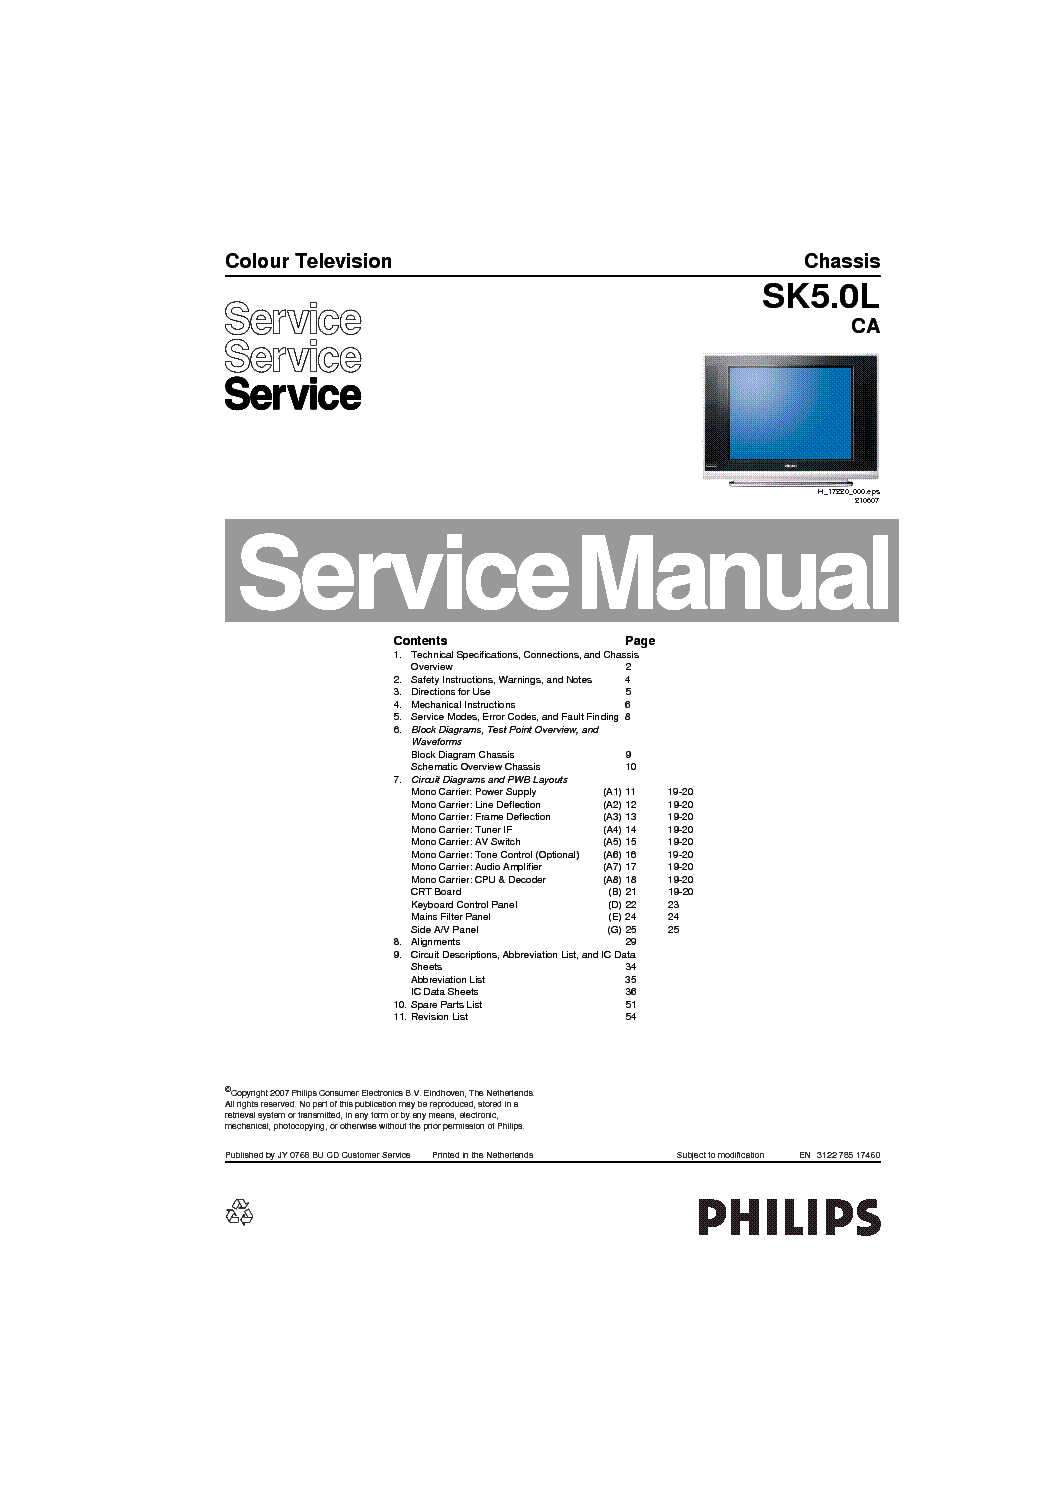 PHILIPS 29PT9457-1-1-55-CHASSIS-SK5-0L-CA SM service manual (1st page)